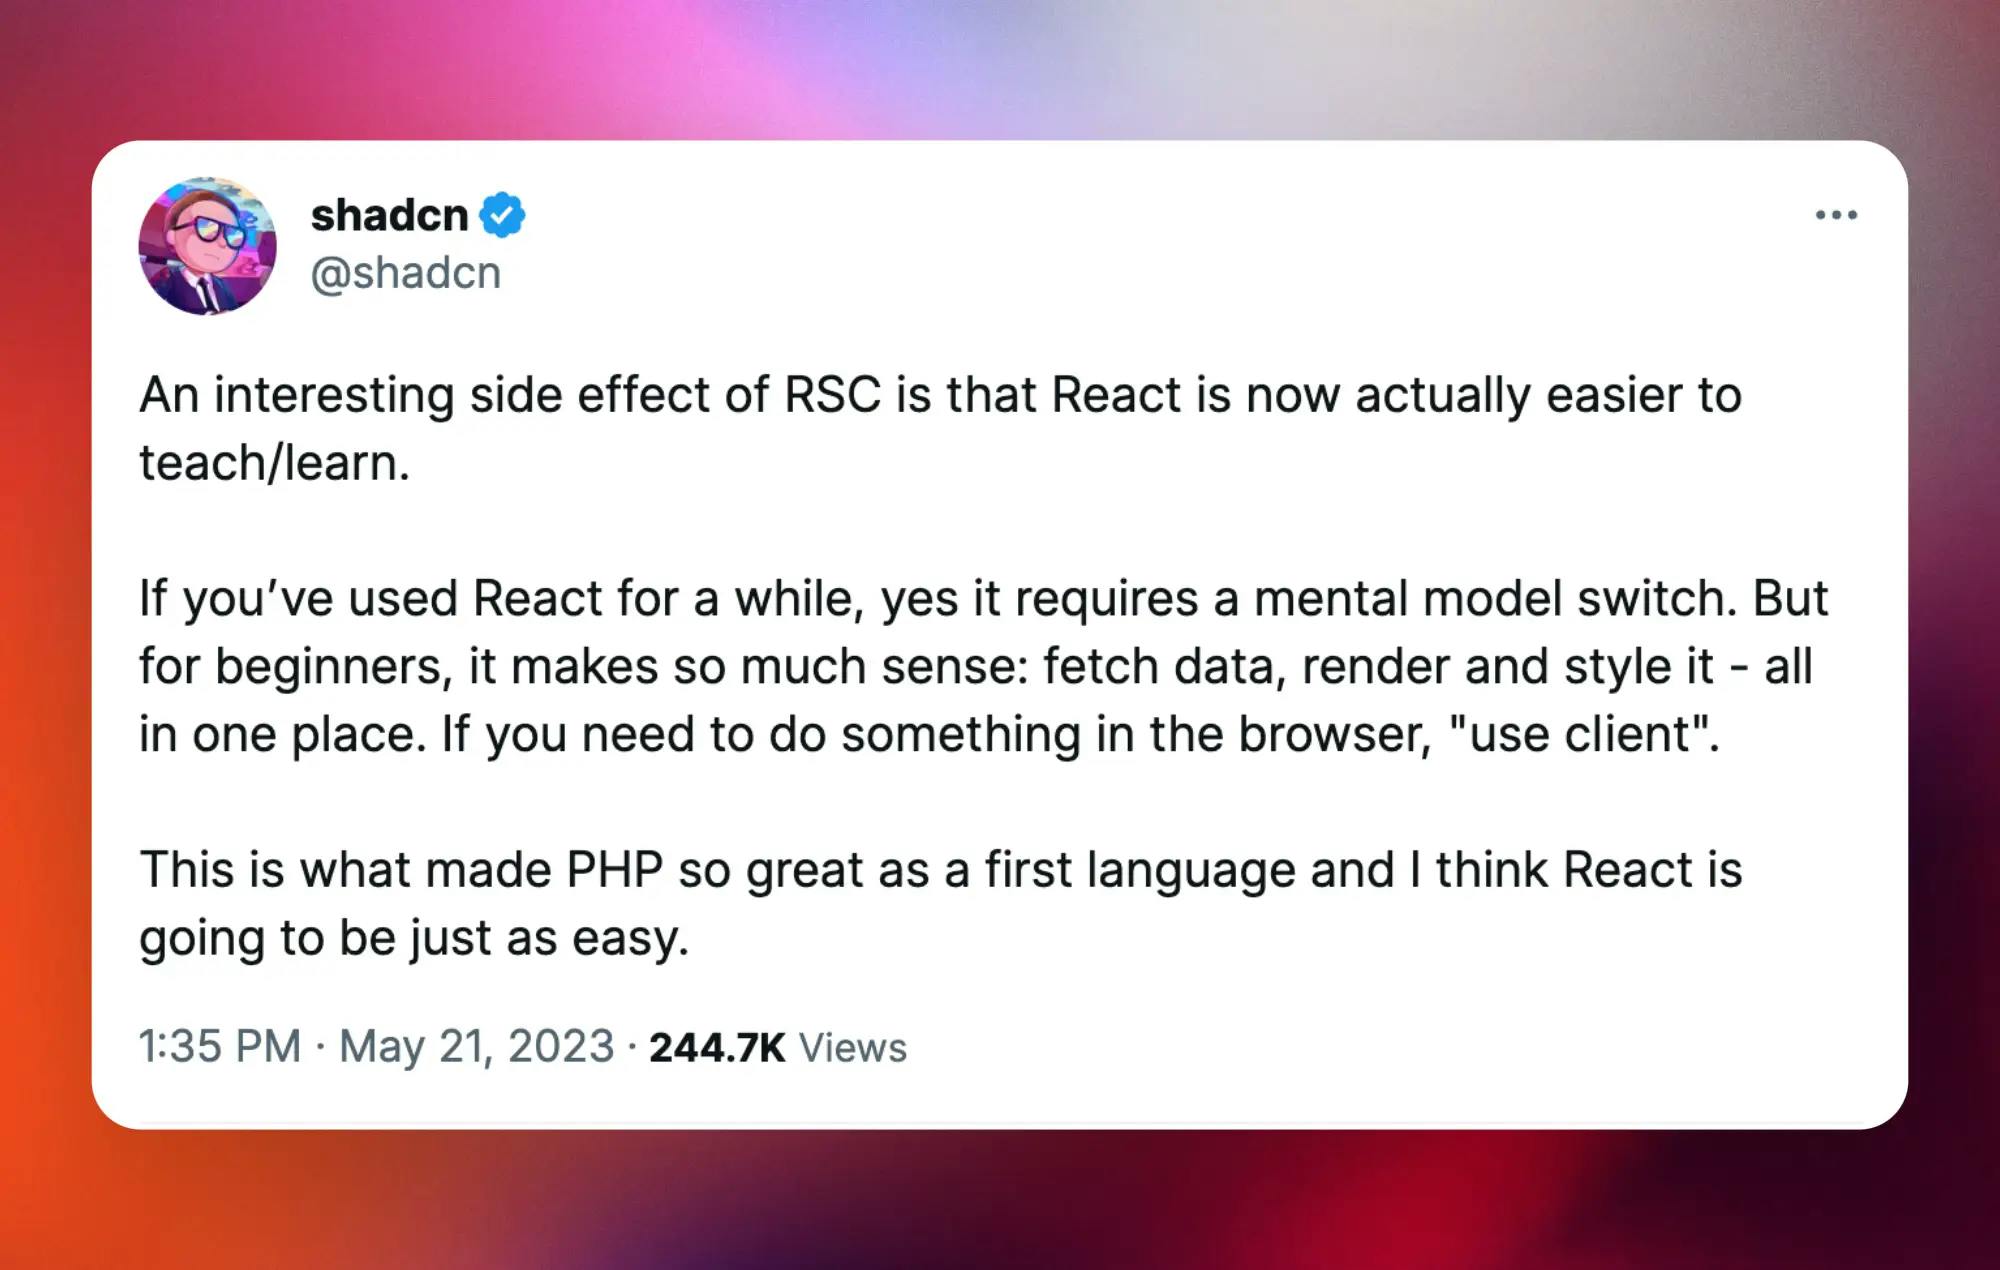 @shadcn: “An interesting side effect of RSC is that React is now actually easier to teach/learn. If you’ve used React for a while, yes it requires a mental model switch. But for beginners, it makes so much sense: fetch data, render and style it - all in one place. If you need to do something in the browser, "use client". This is what made PHP so great as a first language and I think React is going to be just as easy.”